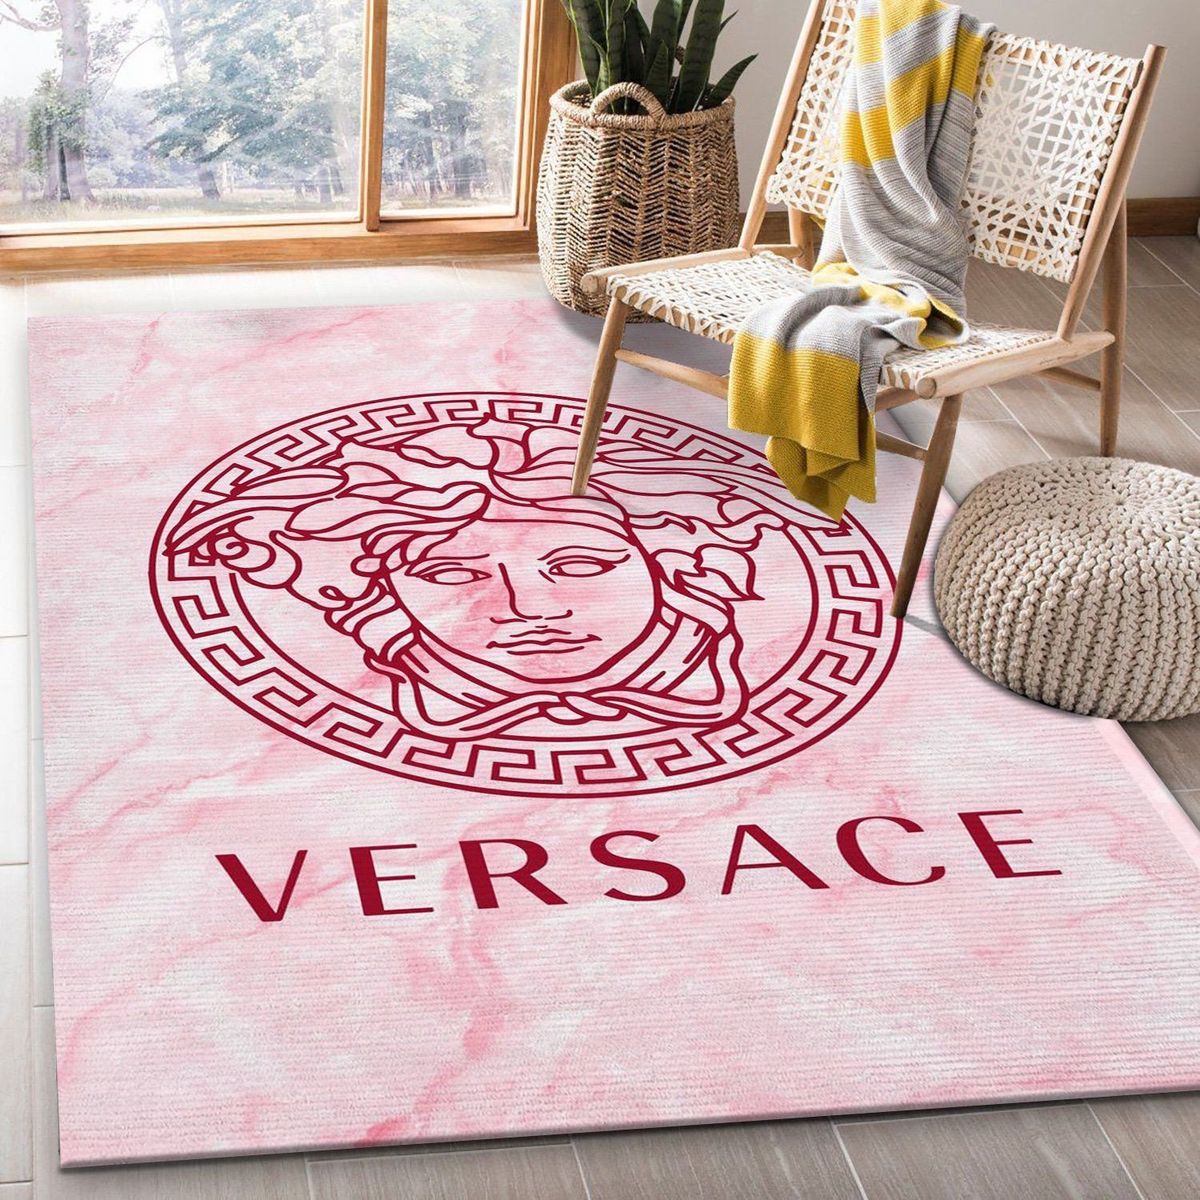 Versace Full Pink Color Luxury Brand Carpet Rug Limited Edition